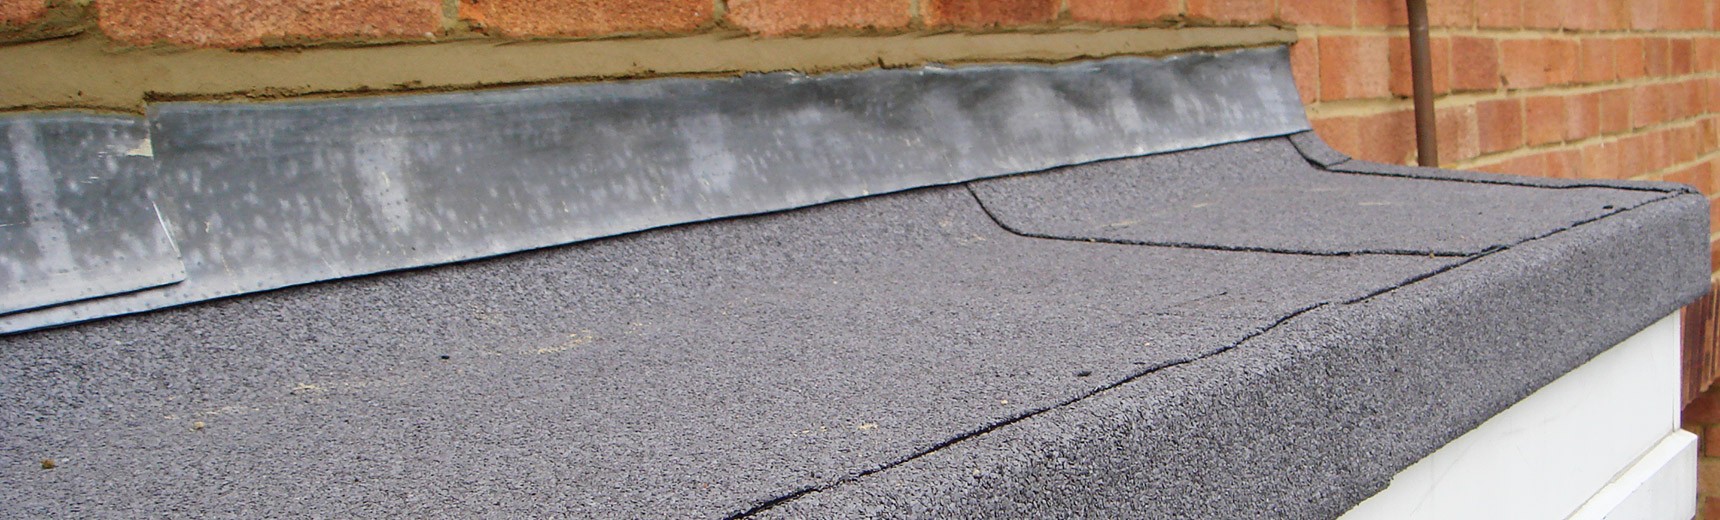 Repairs to felt roofs